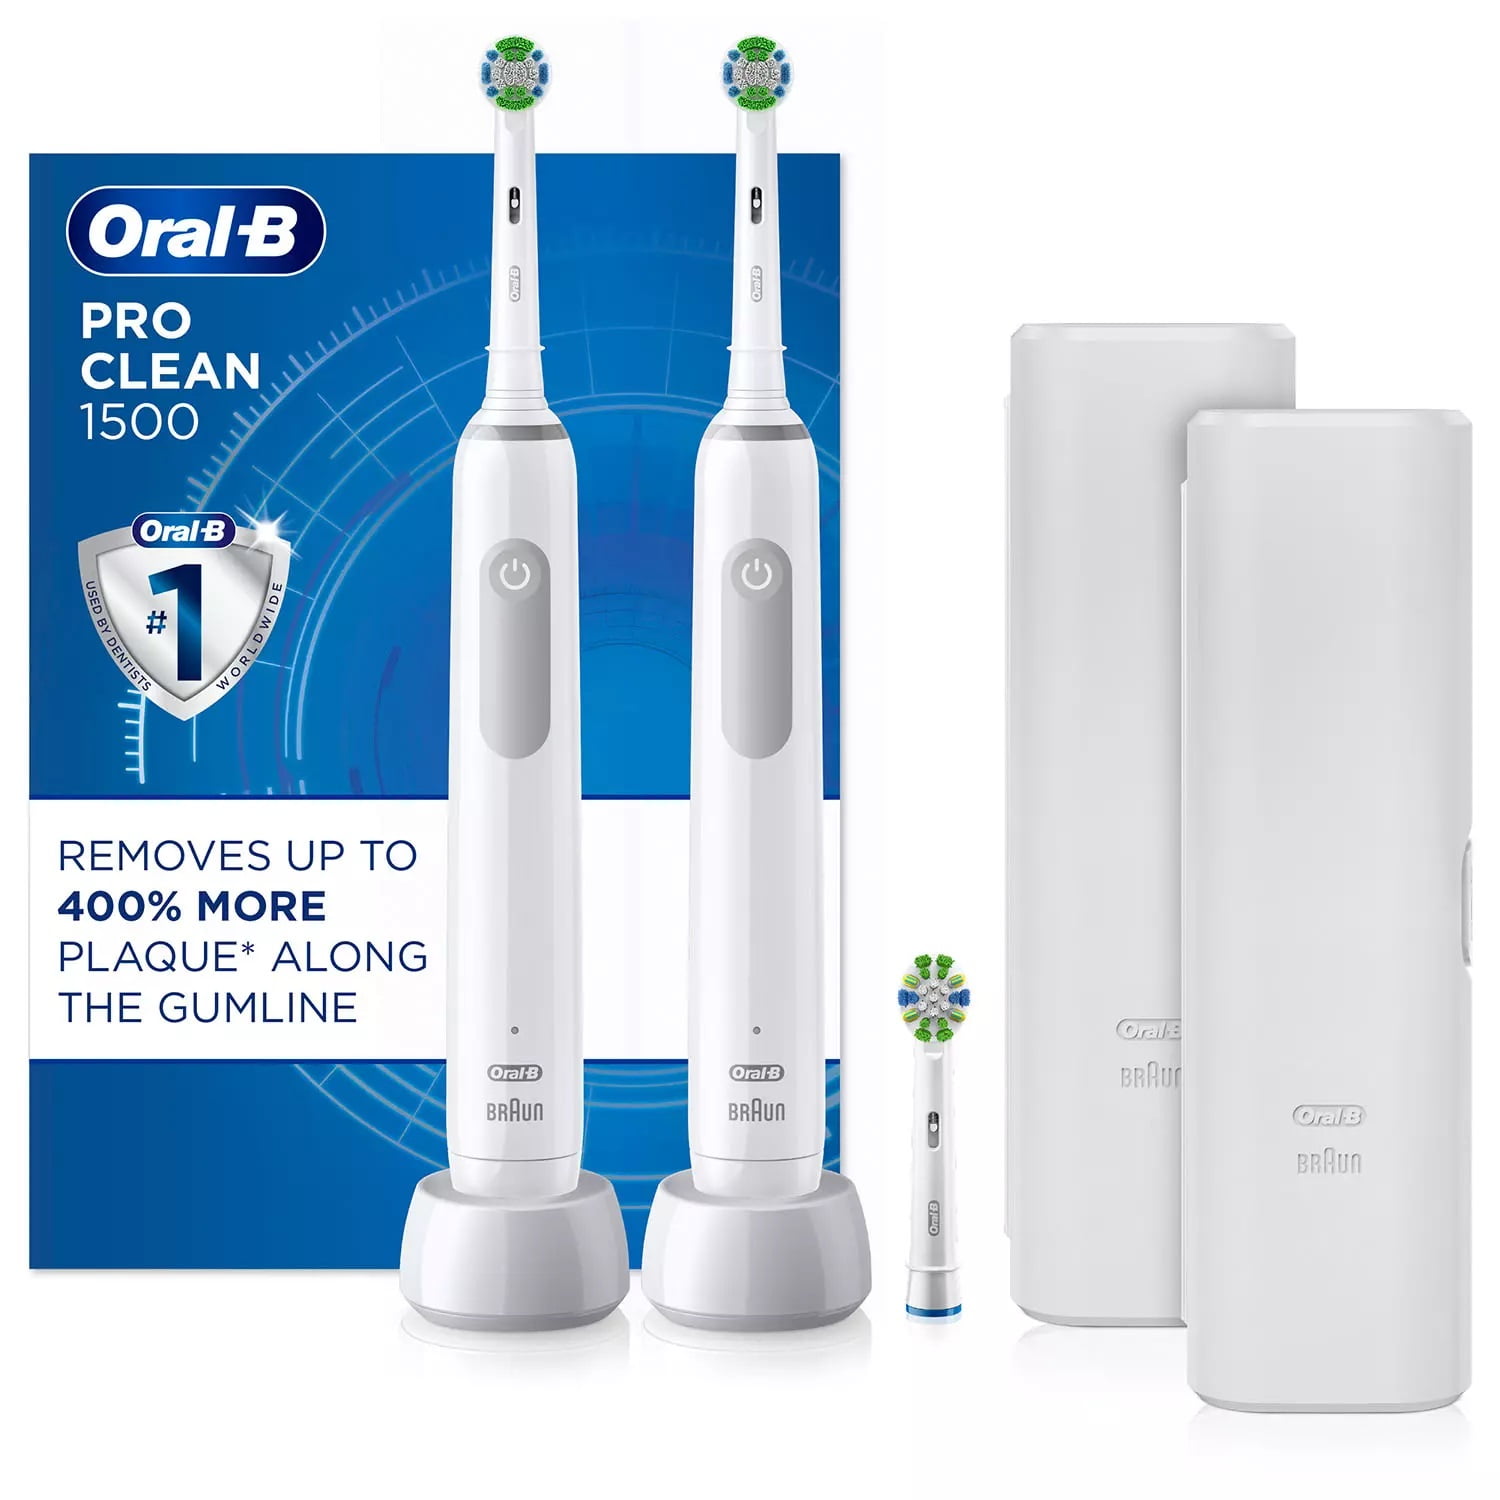 Oral-B Pro 1500 Electric Rechargeable Toothbrush, Powered by Braun - Walmart.com